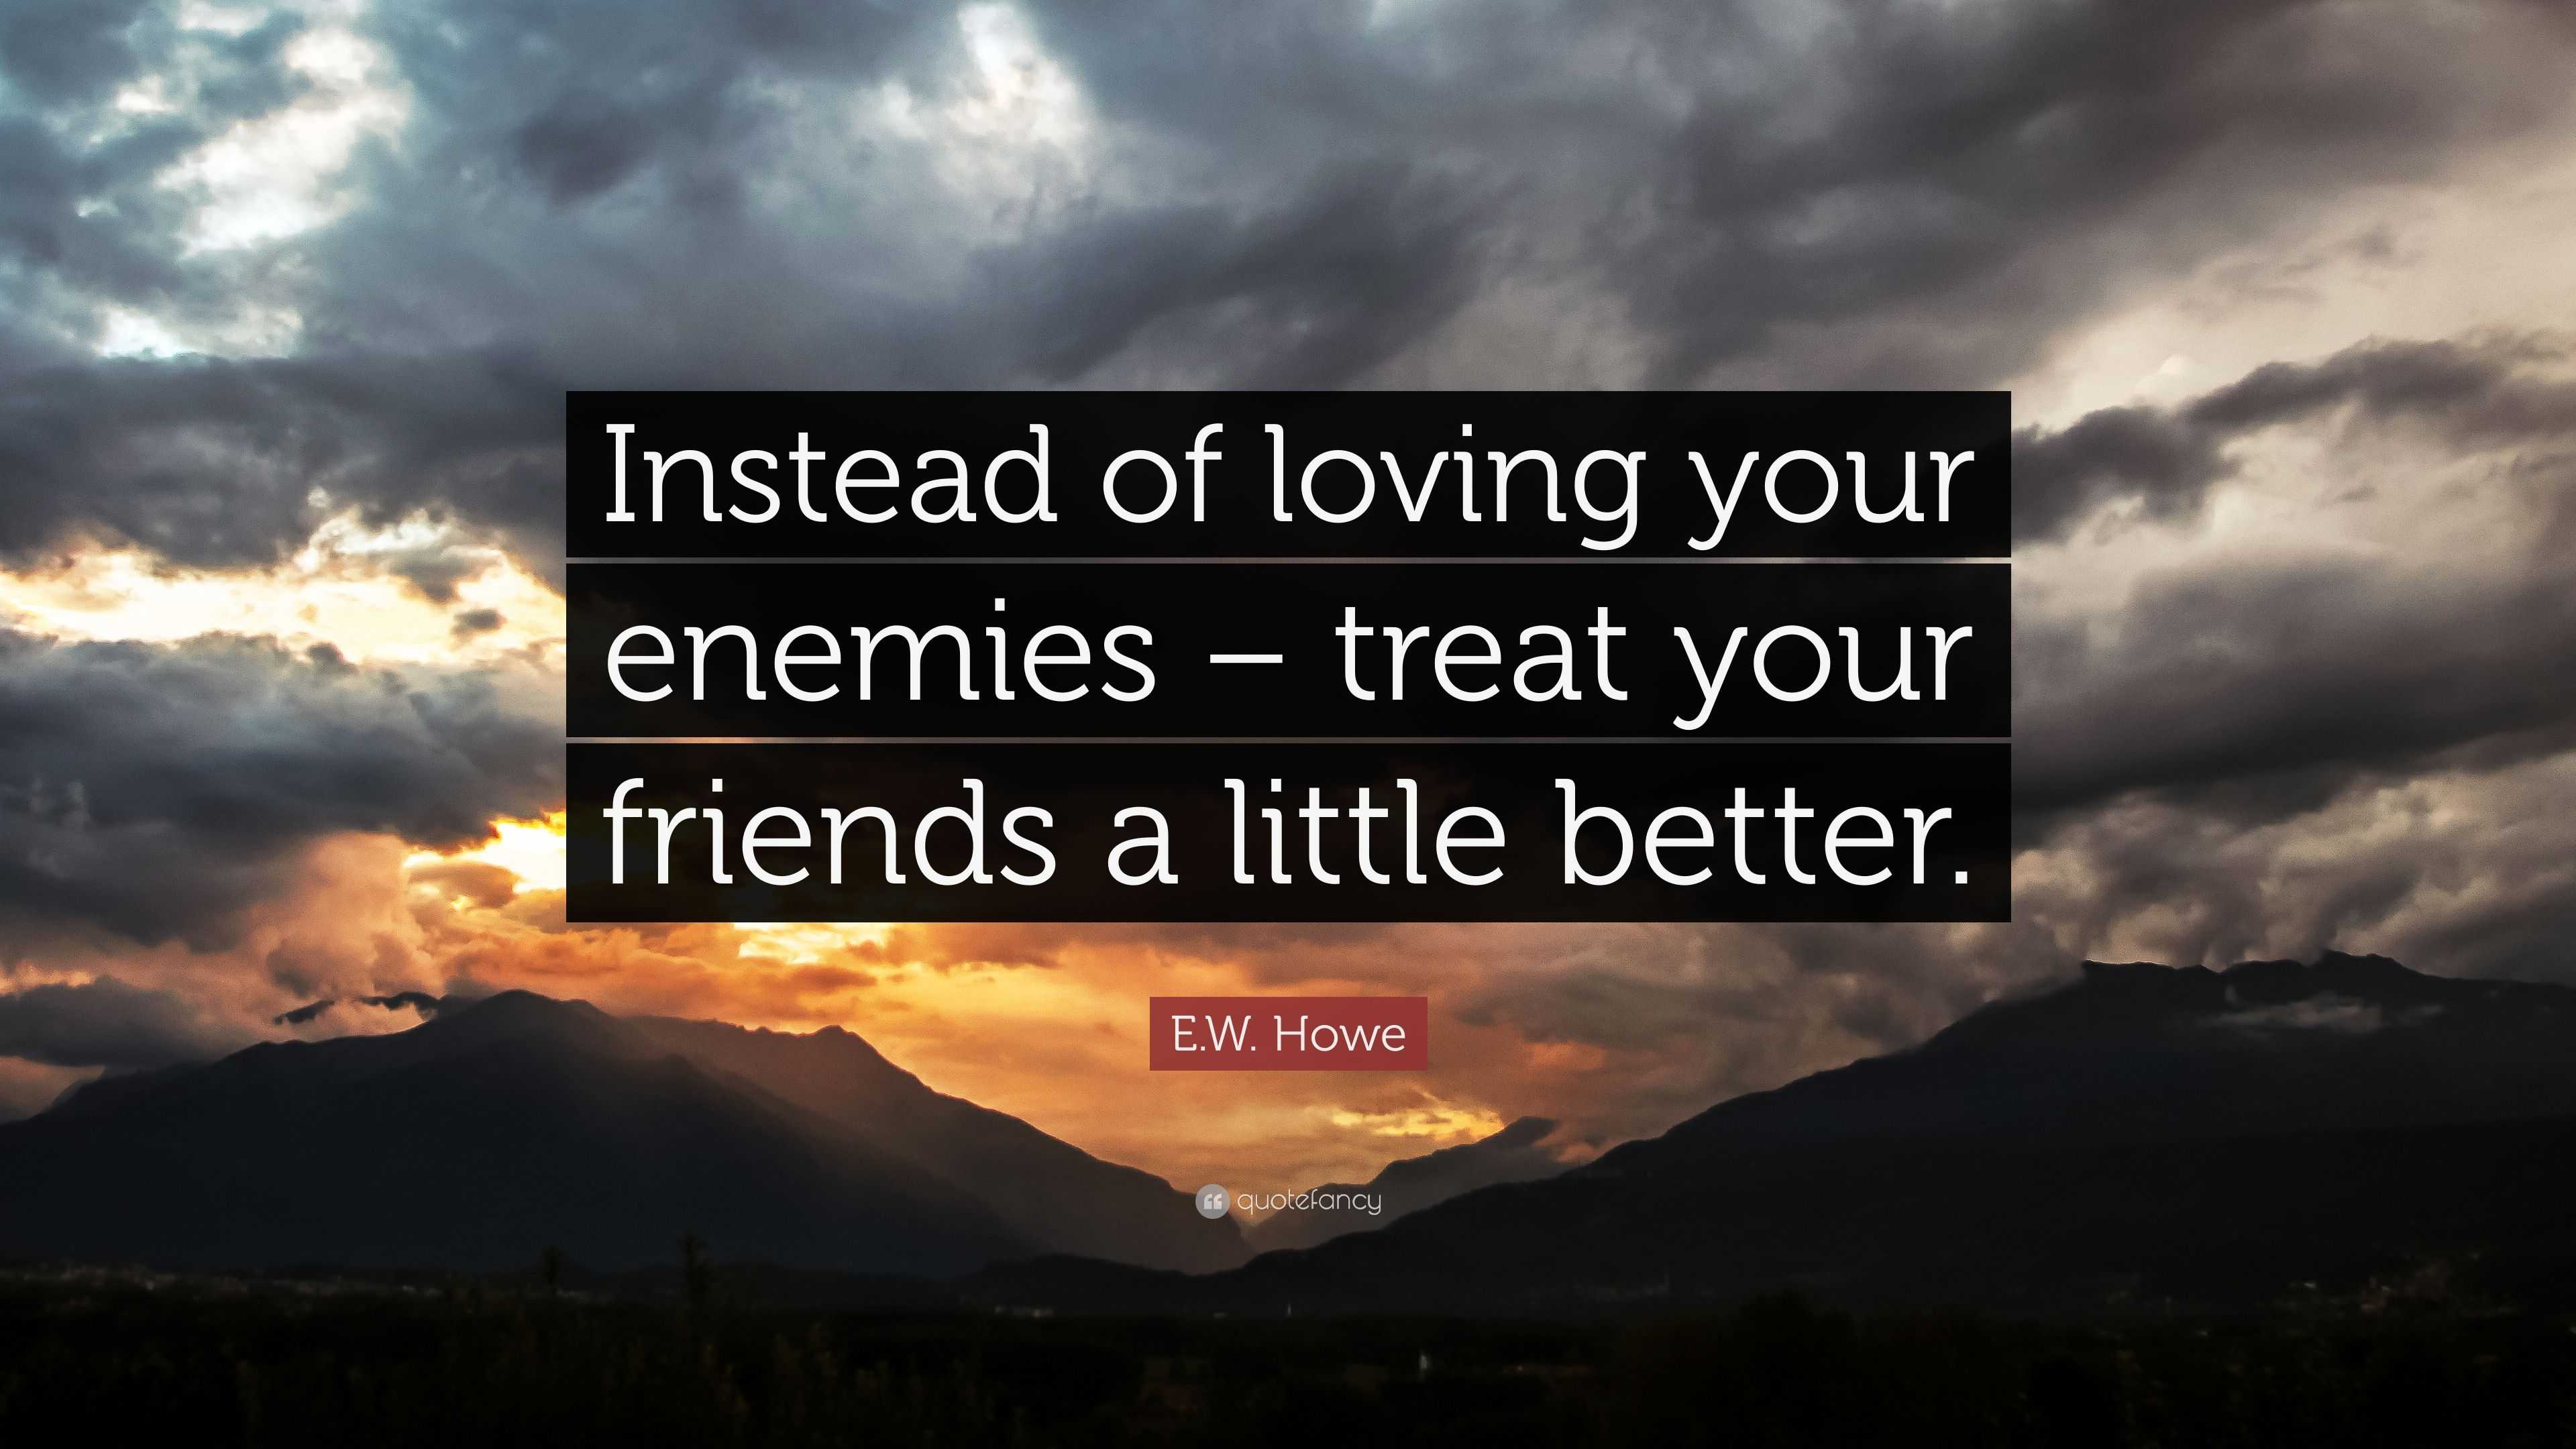 E W Howe Quote “Instead of loving your enemies – treat your friends a little